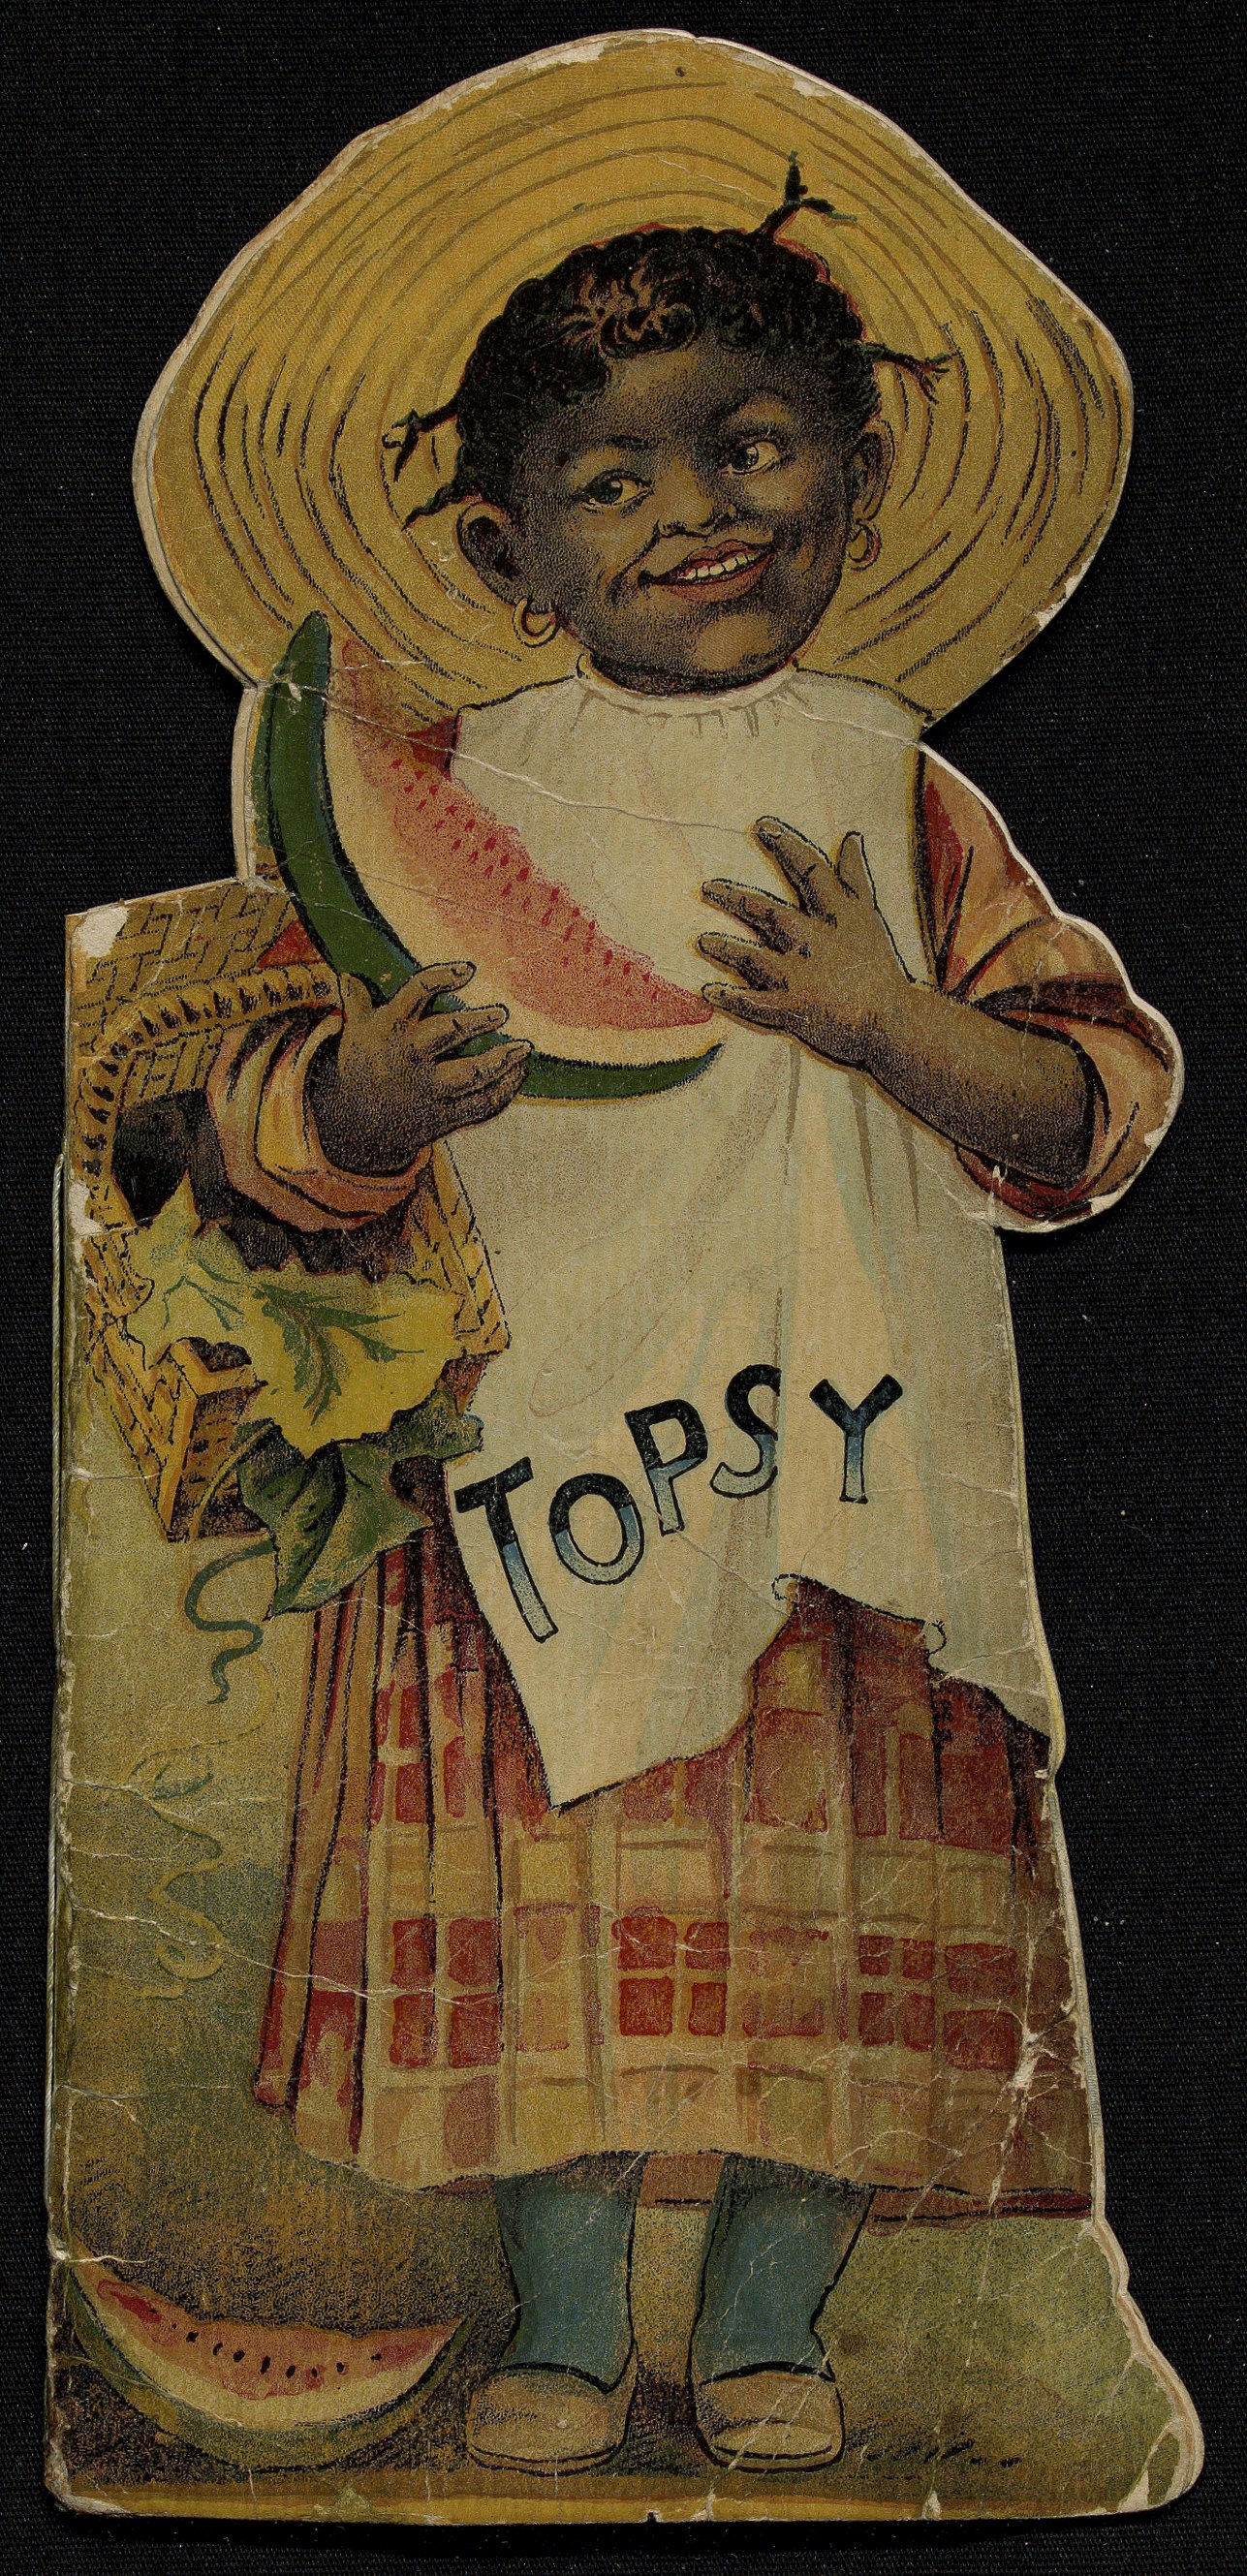 Topsy, c.1894-1914. Content compilation © 2020, by the American Antiquarian Society. All rights reserved.